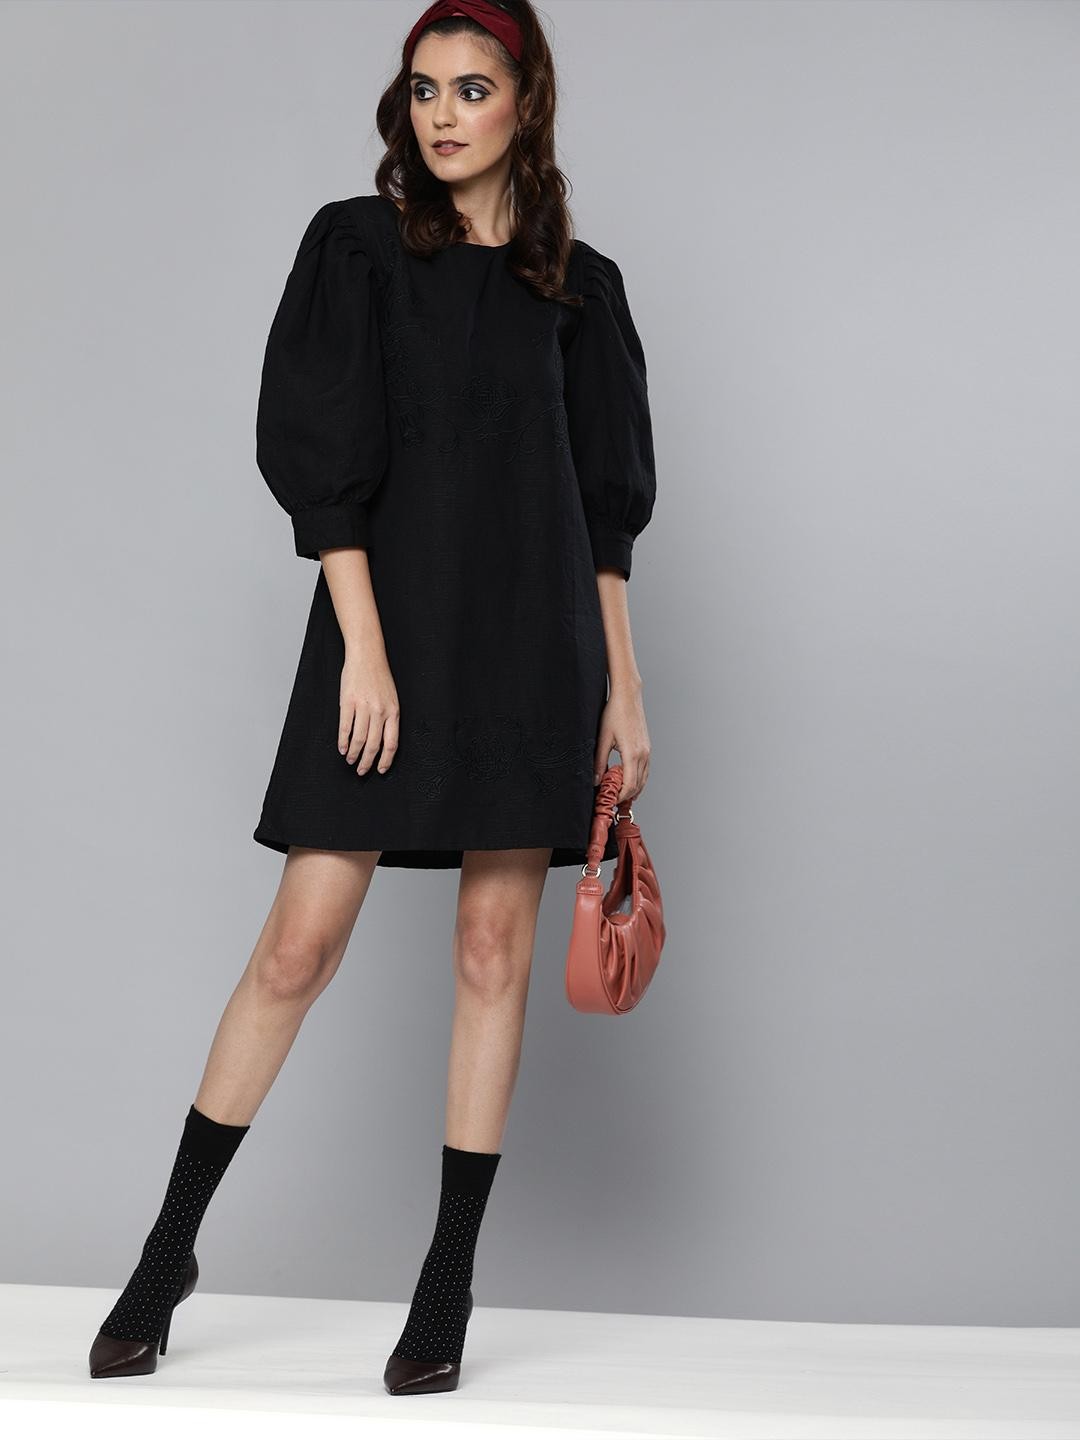 Volume sleeves embroidered Linen dress